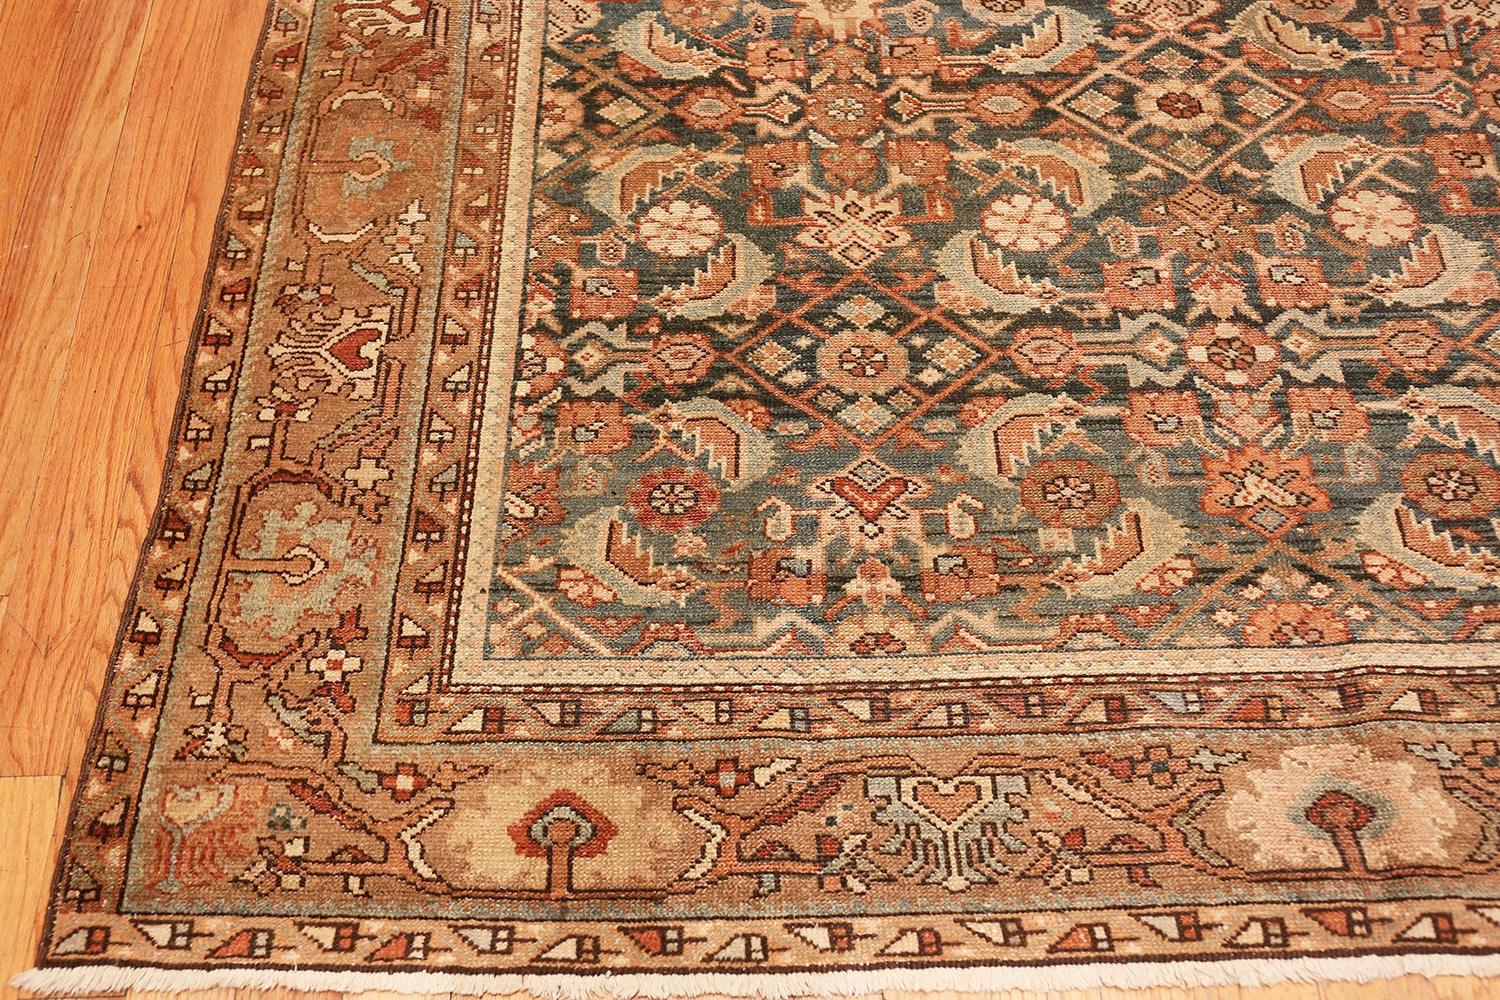 20th Century Antique Tribal Persian Malayer Rug. Size: 6' 6